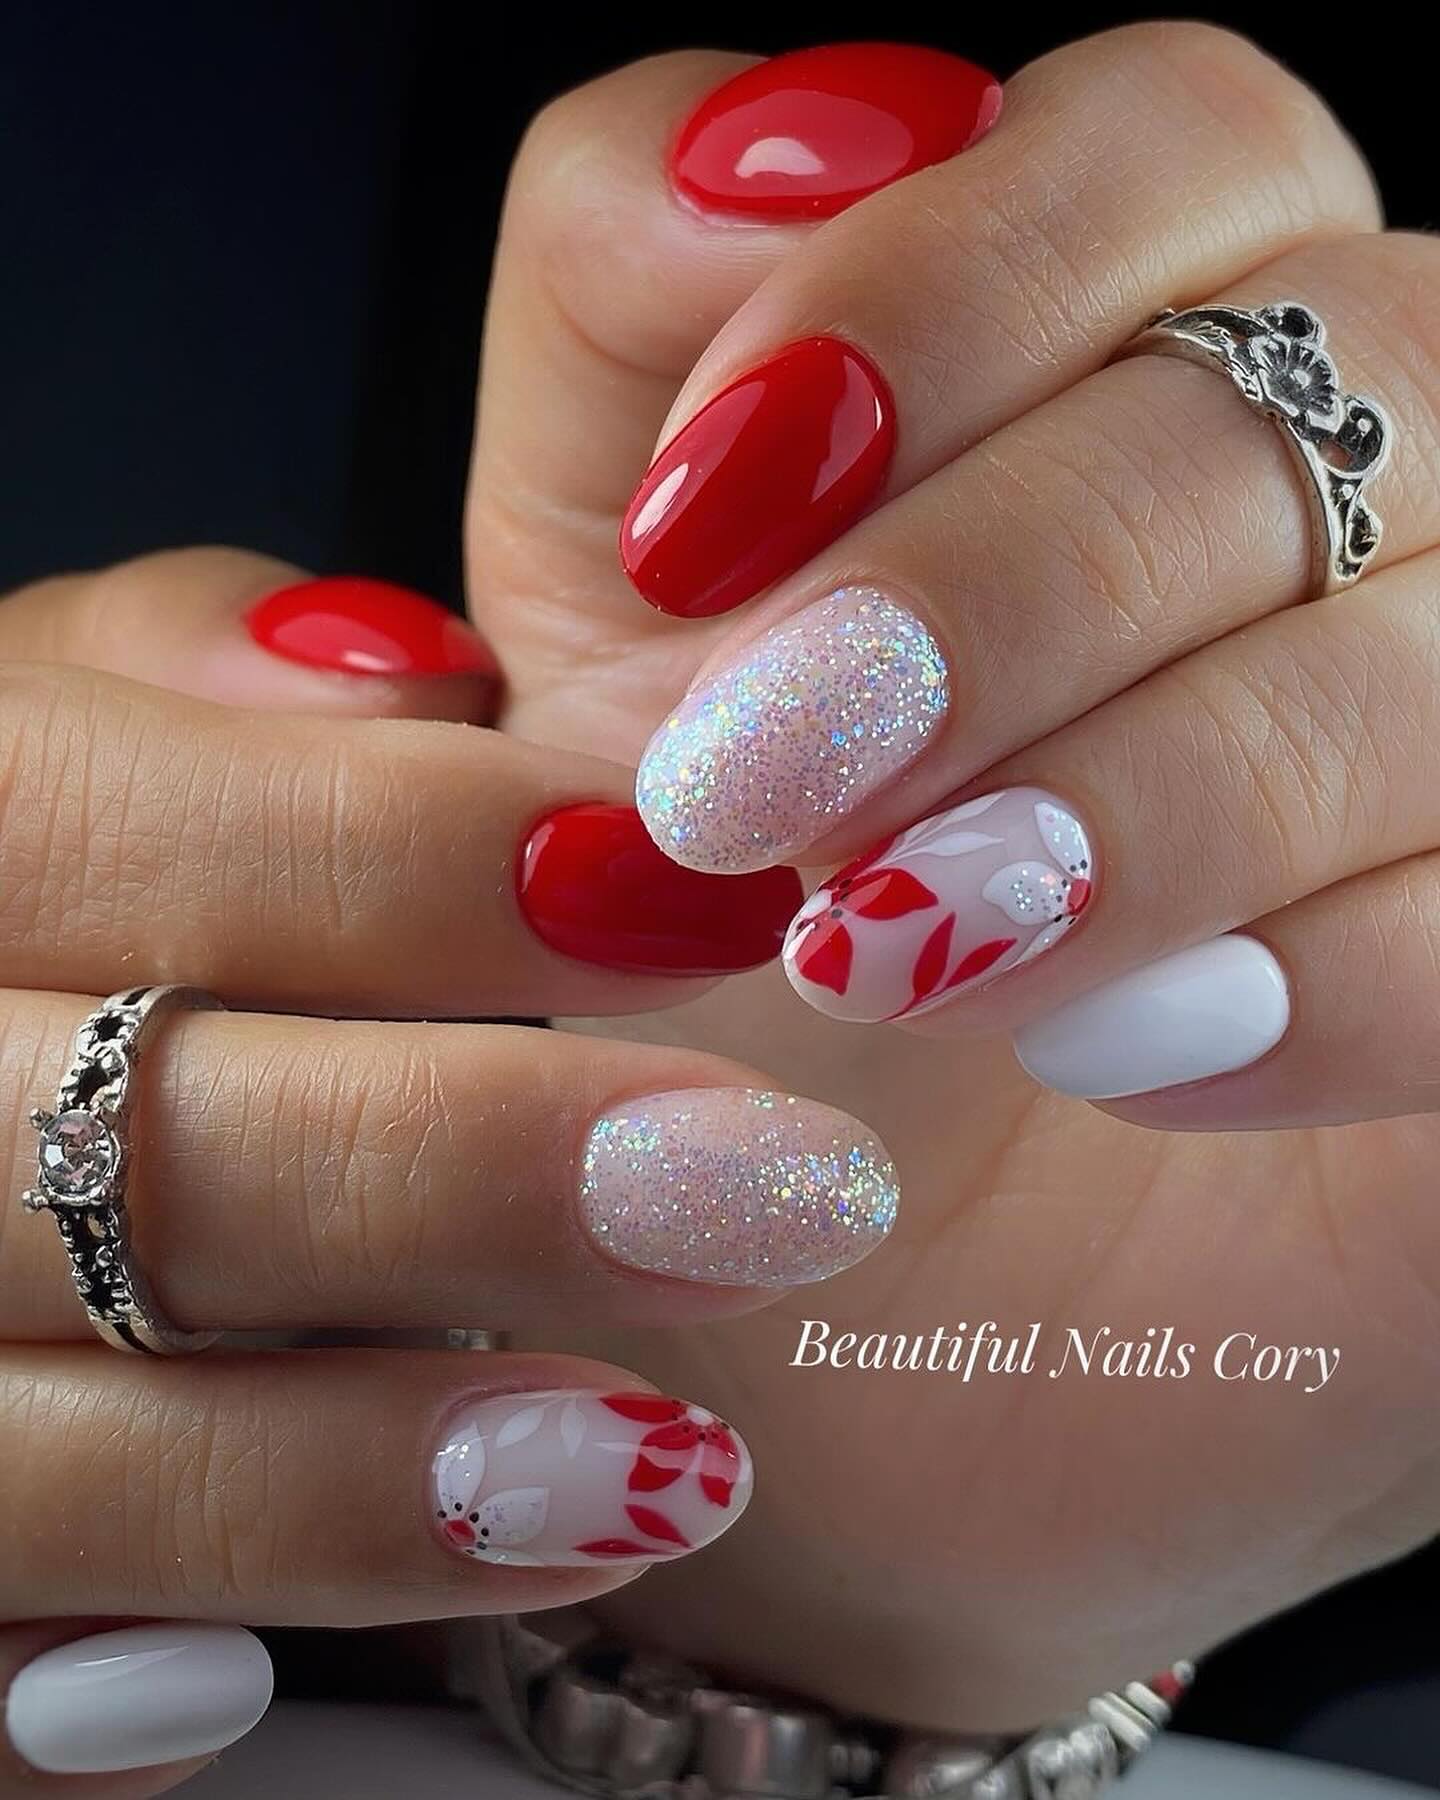 100 Pretty Spring Nail Designs To Try This Year images 98